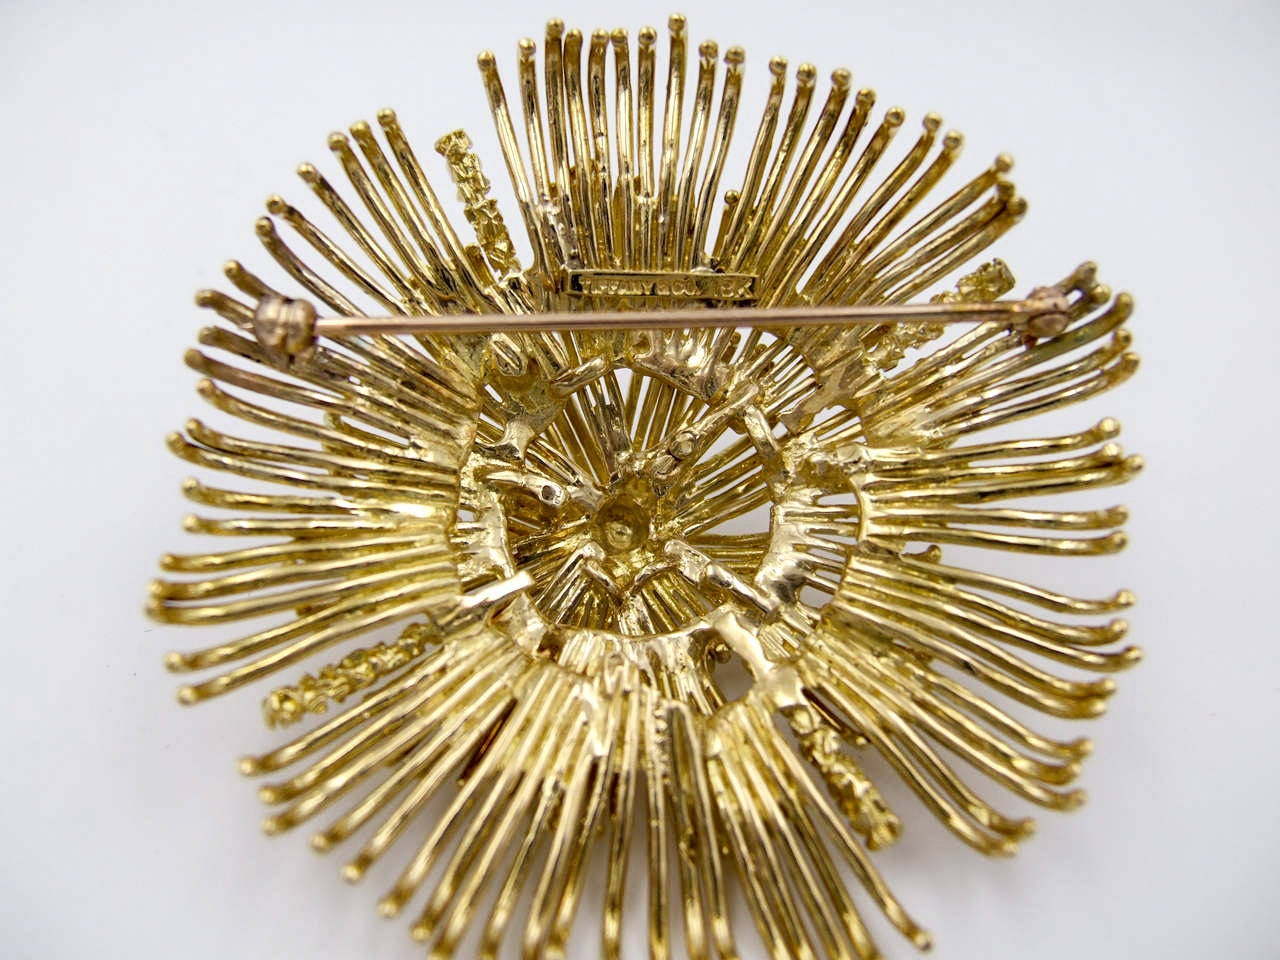 Bold 18 karat gold Tiffany & Co brooch, typical of those from the 1970s, possibly designed by Don Berg for Tiffany; the four rods of heavily textured gold are typical of his work.    It spans 2 1/4 inches across, and will be a statement piece on any